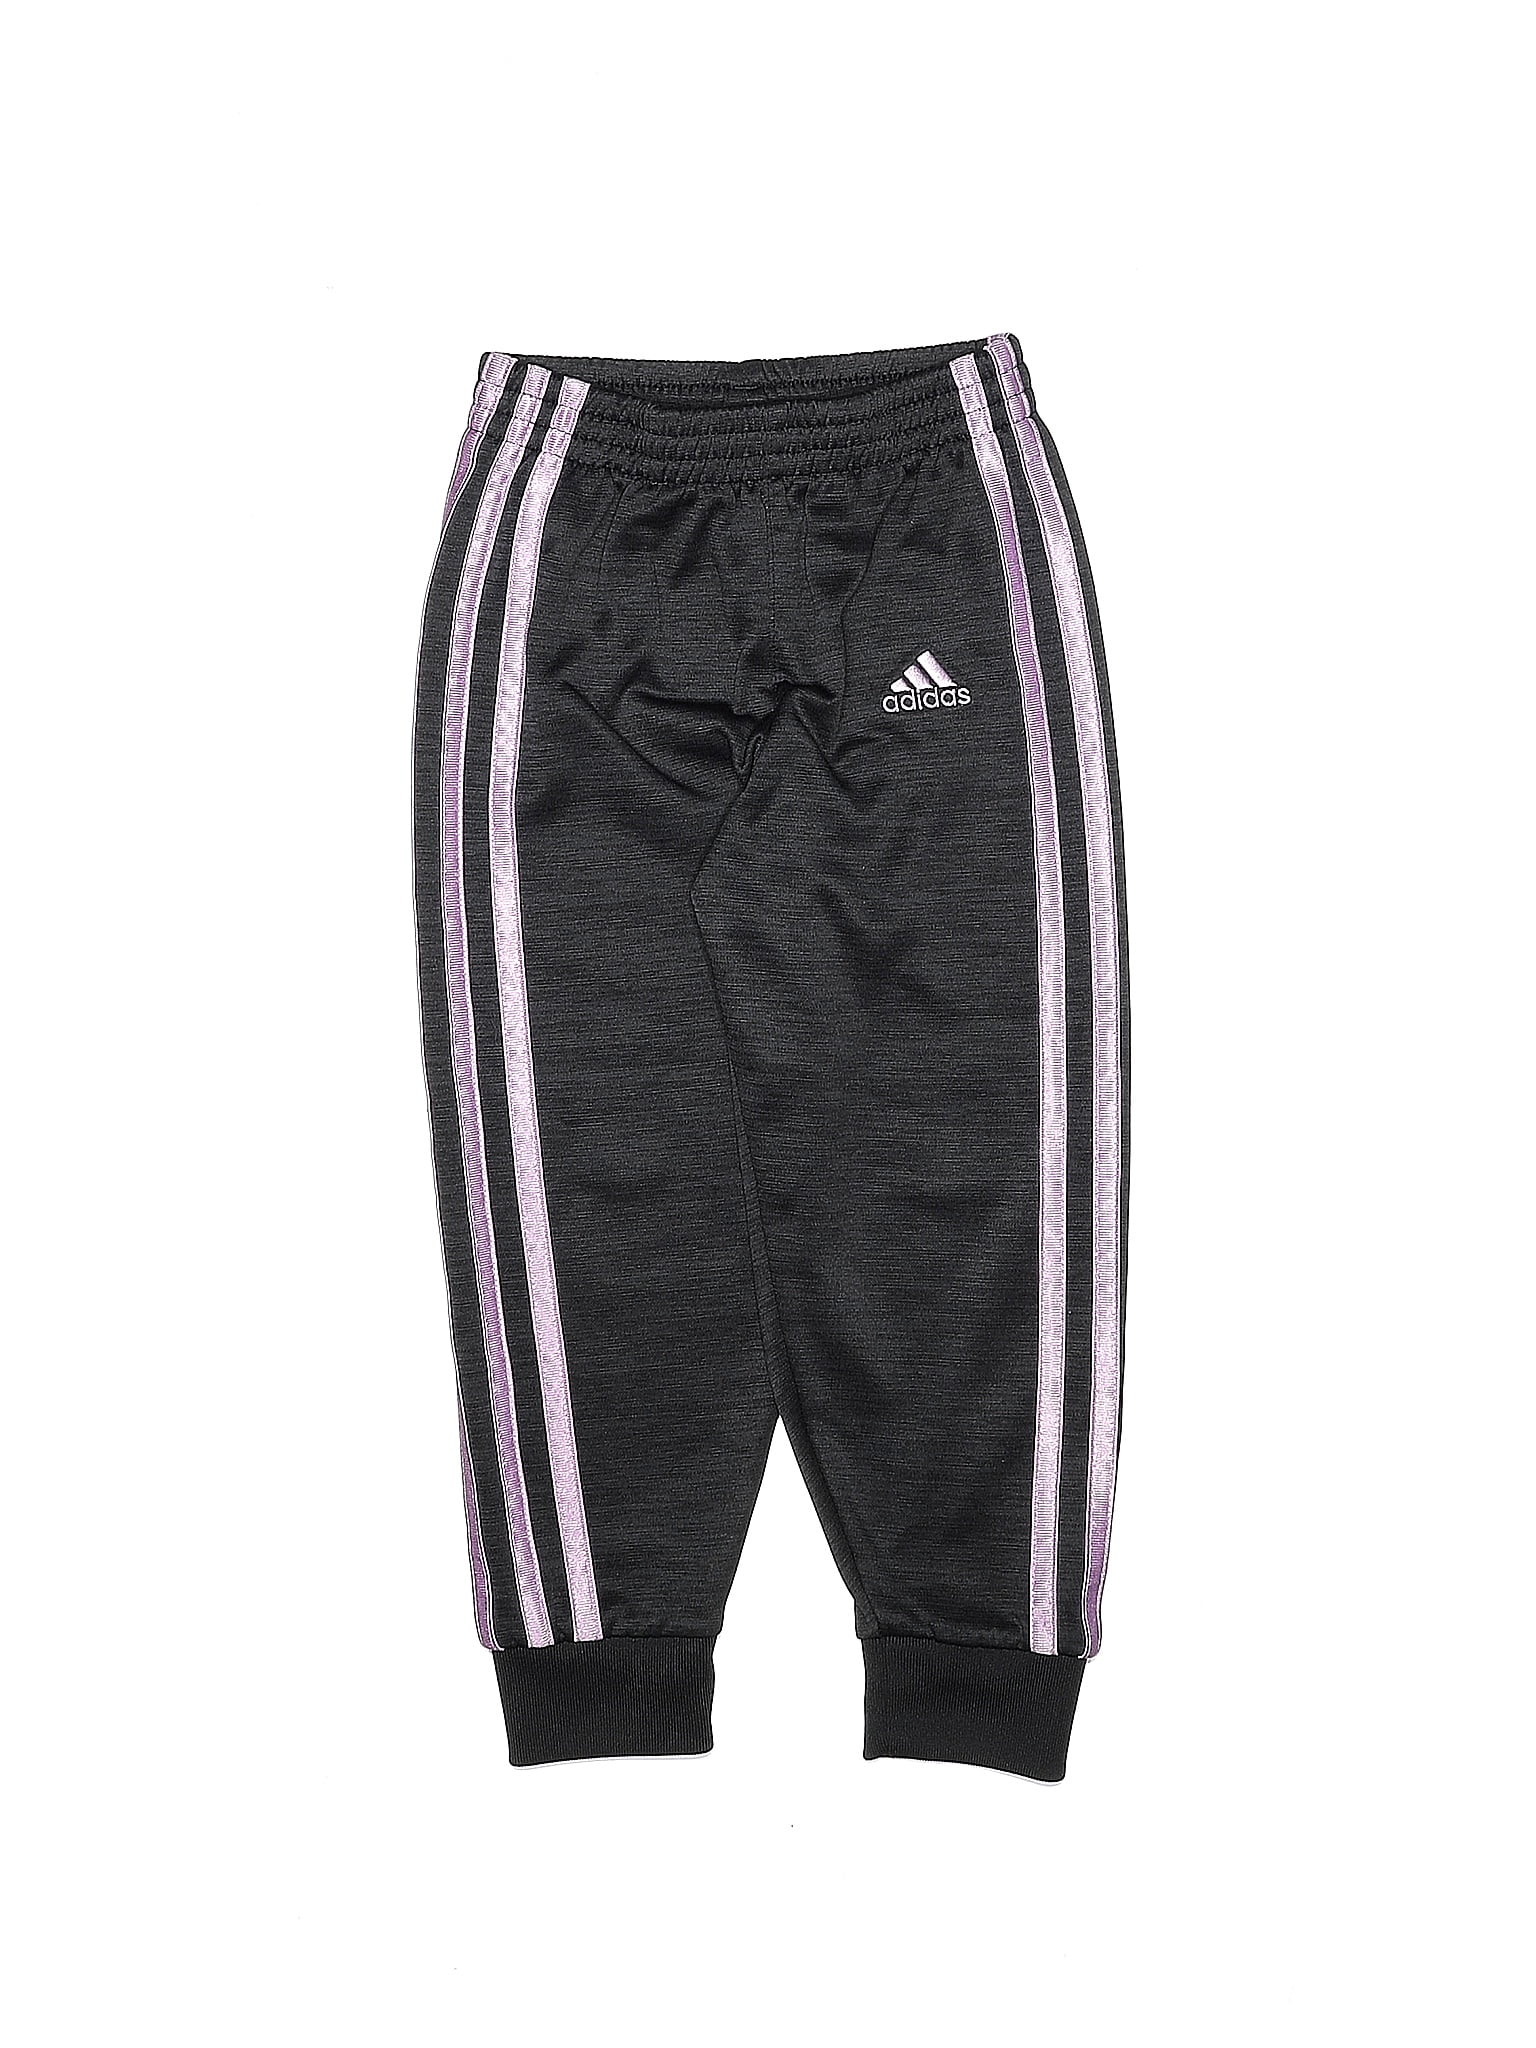 Adidas 100% Polyester Black Track Pants Size L - 63% off